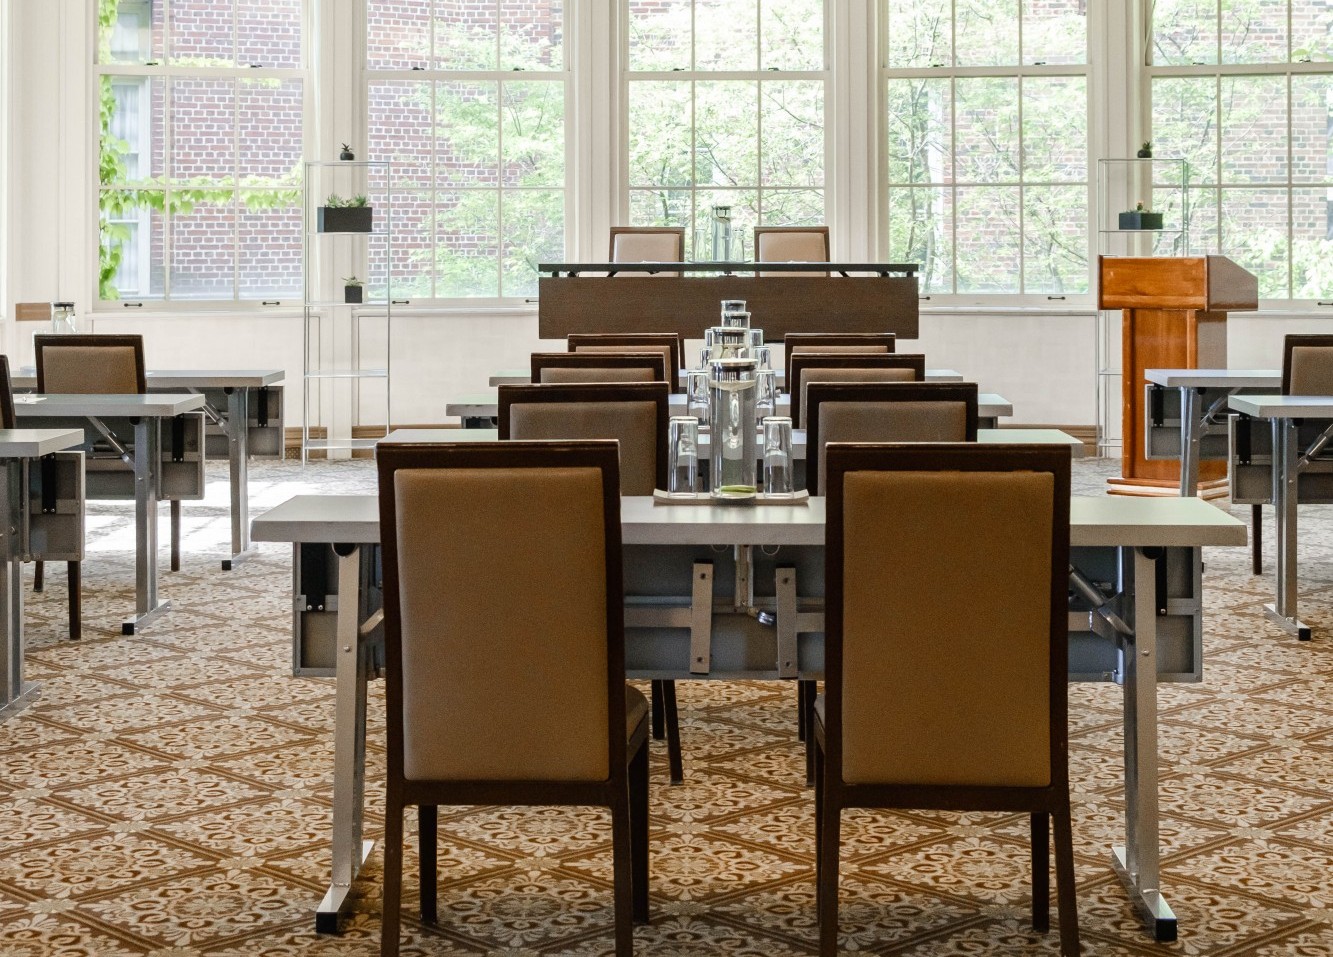 A meeting room at Faculty House with bright light shining through windows in the foreground.